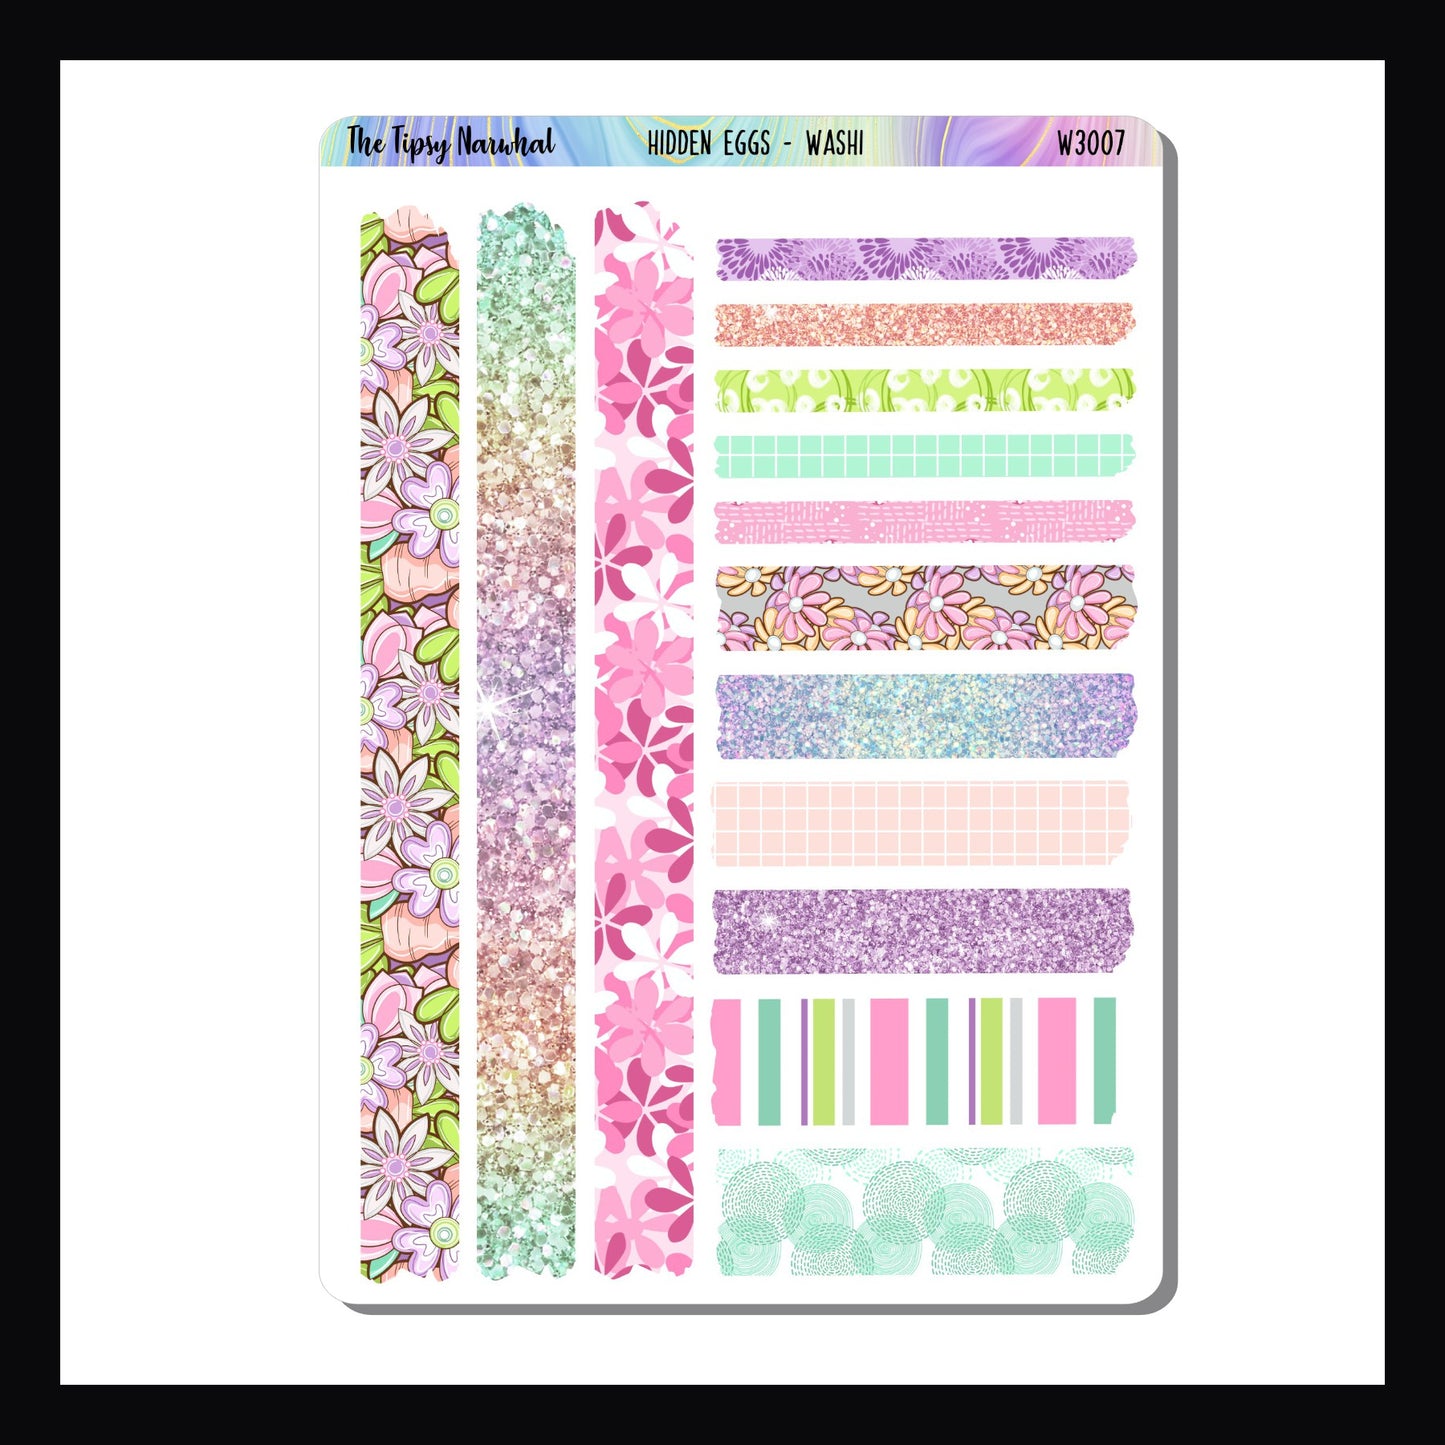 Digital Hidden Eggs Washi Sheet features 14 washi stickers of various sizes.  Colors and patterns coordinate with the Hidden Eggs Sticker Kits.